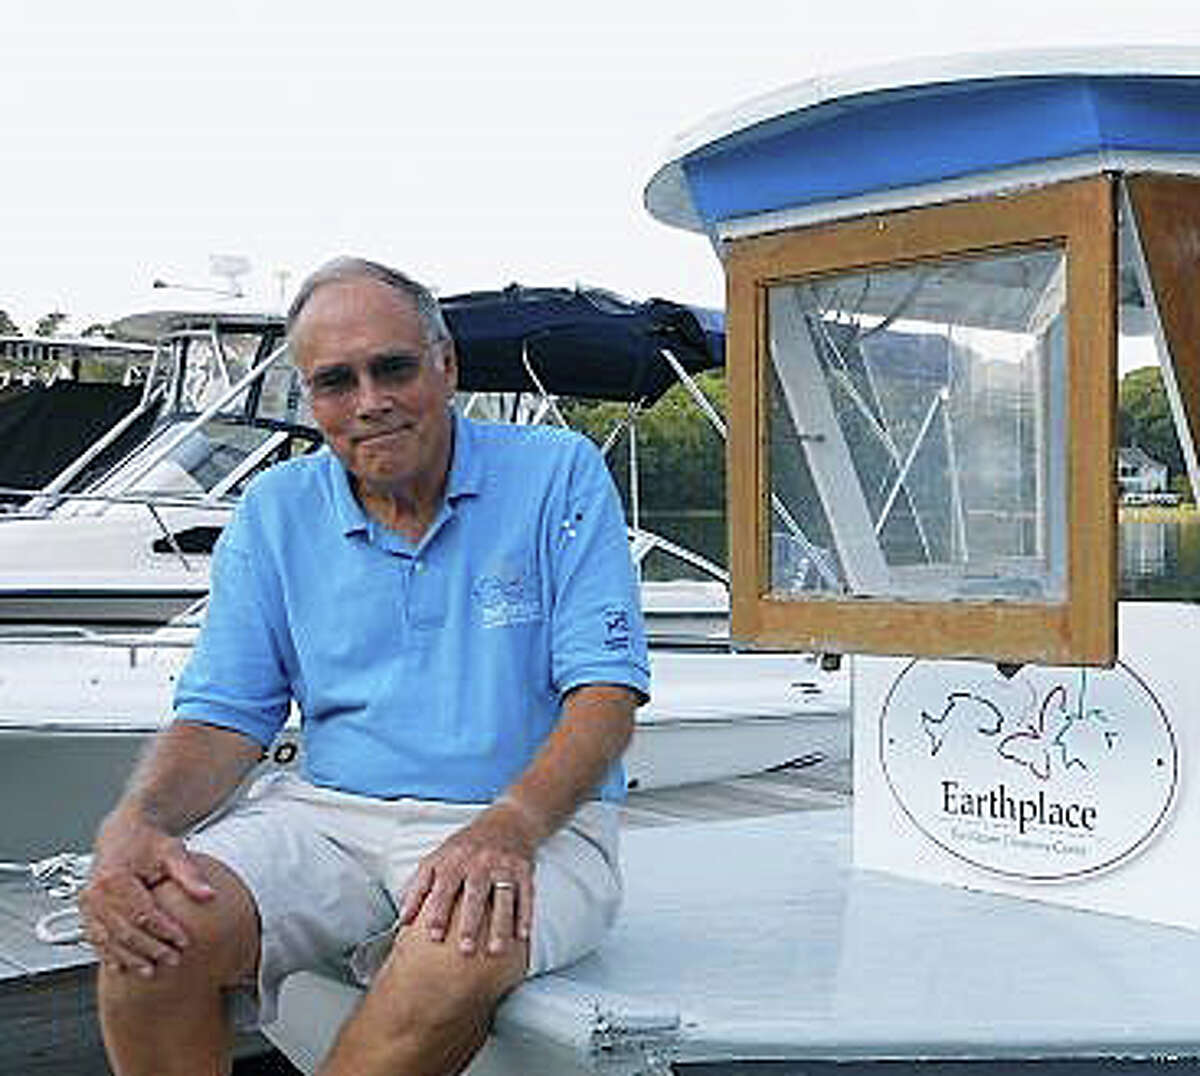 Richard Harris, the executive director of the Harbor Watch program at Earthplace, is retiring after 26 years in the post at the end of the year.